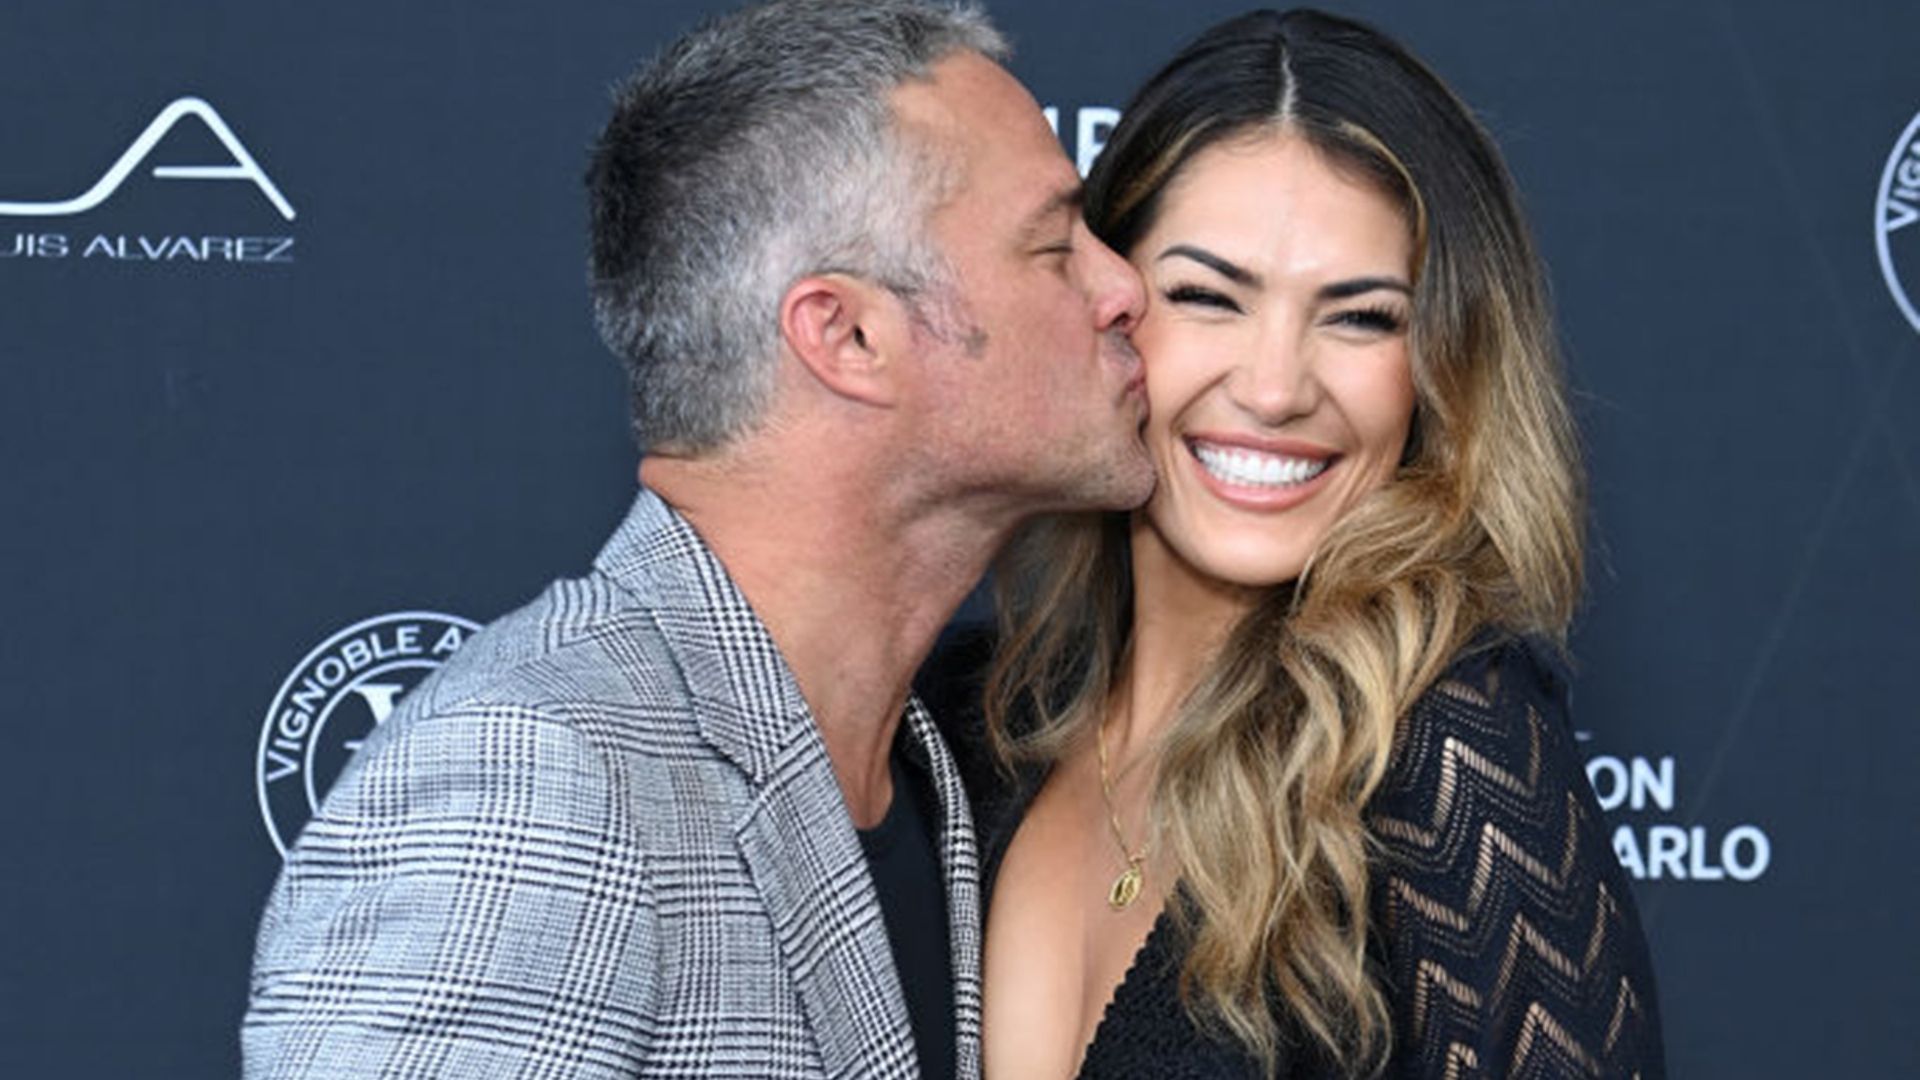 Inside Chicago Fire star Taylor Kinney's dating history